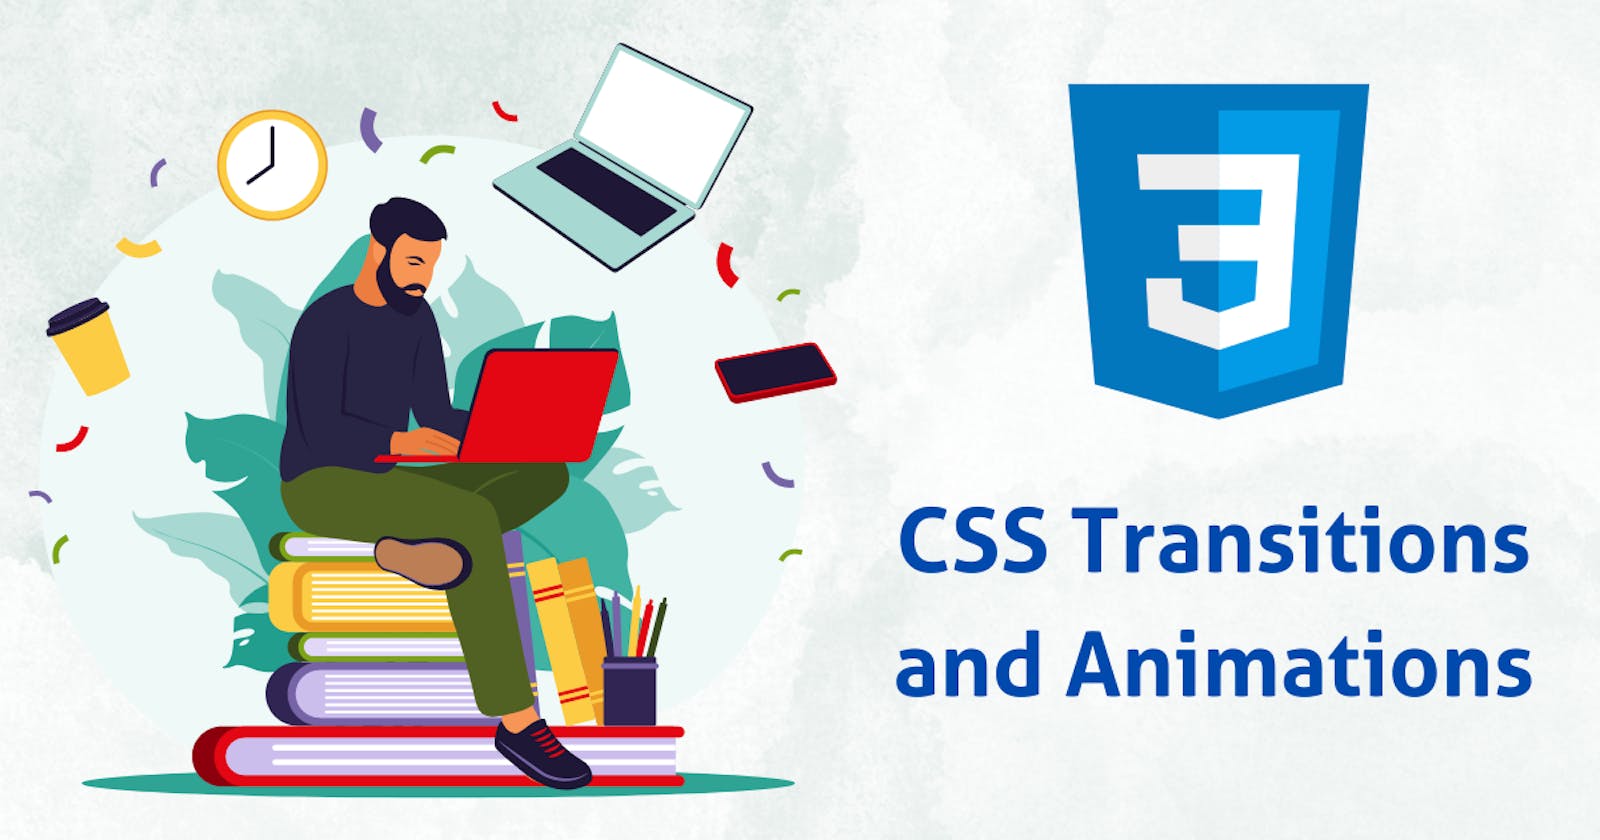 CSS Transitions and Animations: Adding animations to web elements with CSS.